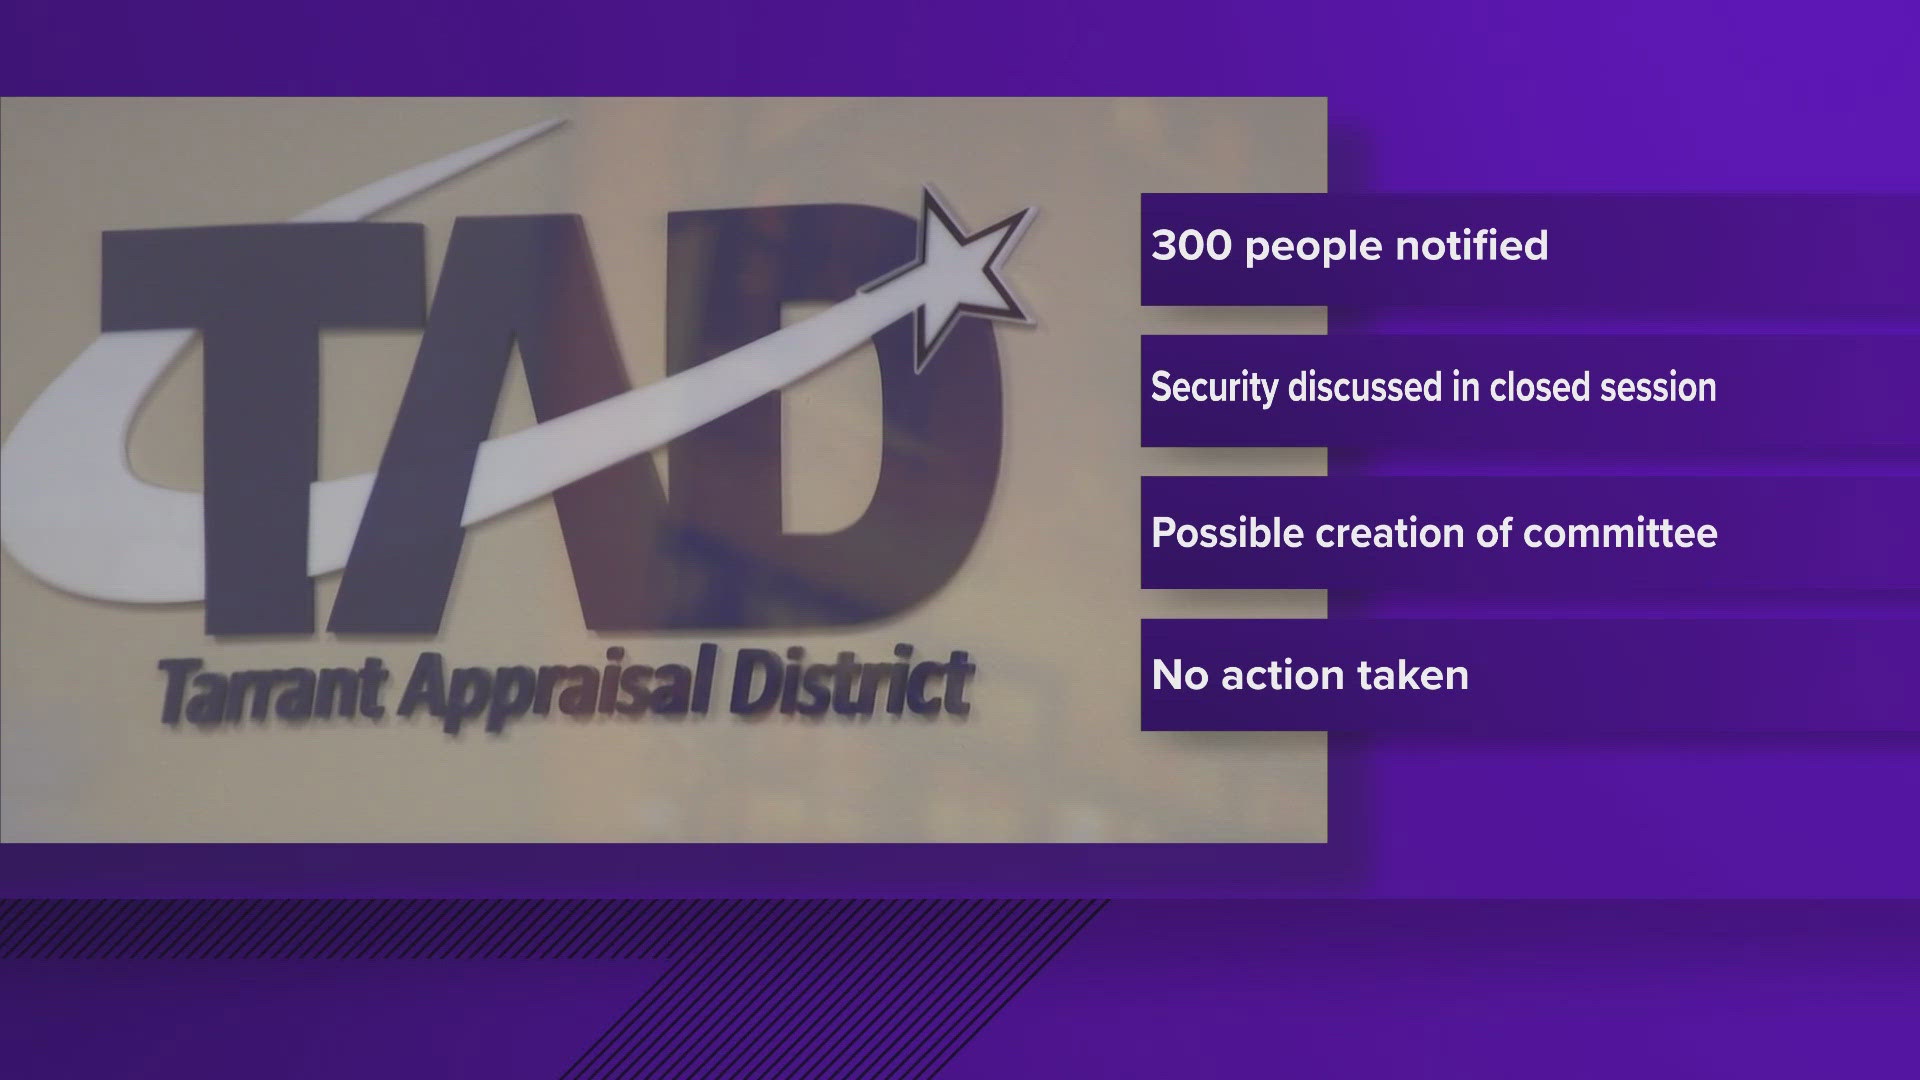 Back in March, the Tarrant Appraisal District notified 300 people their information had potentially been compromised.